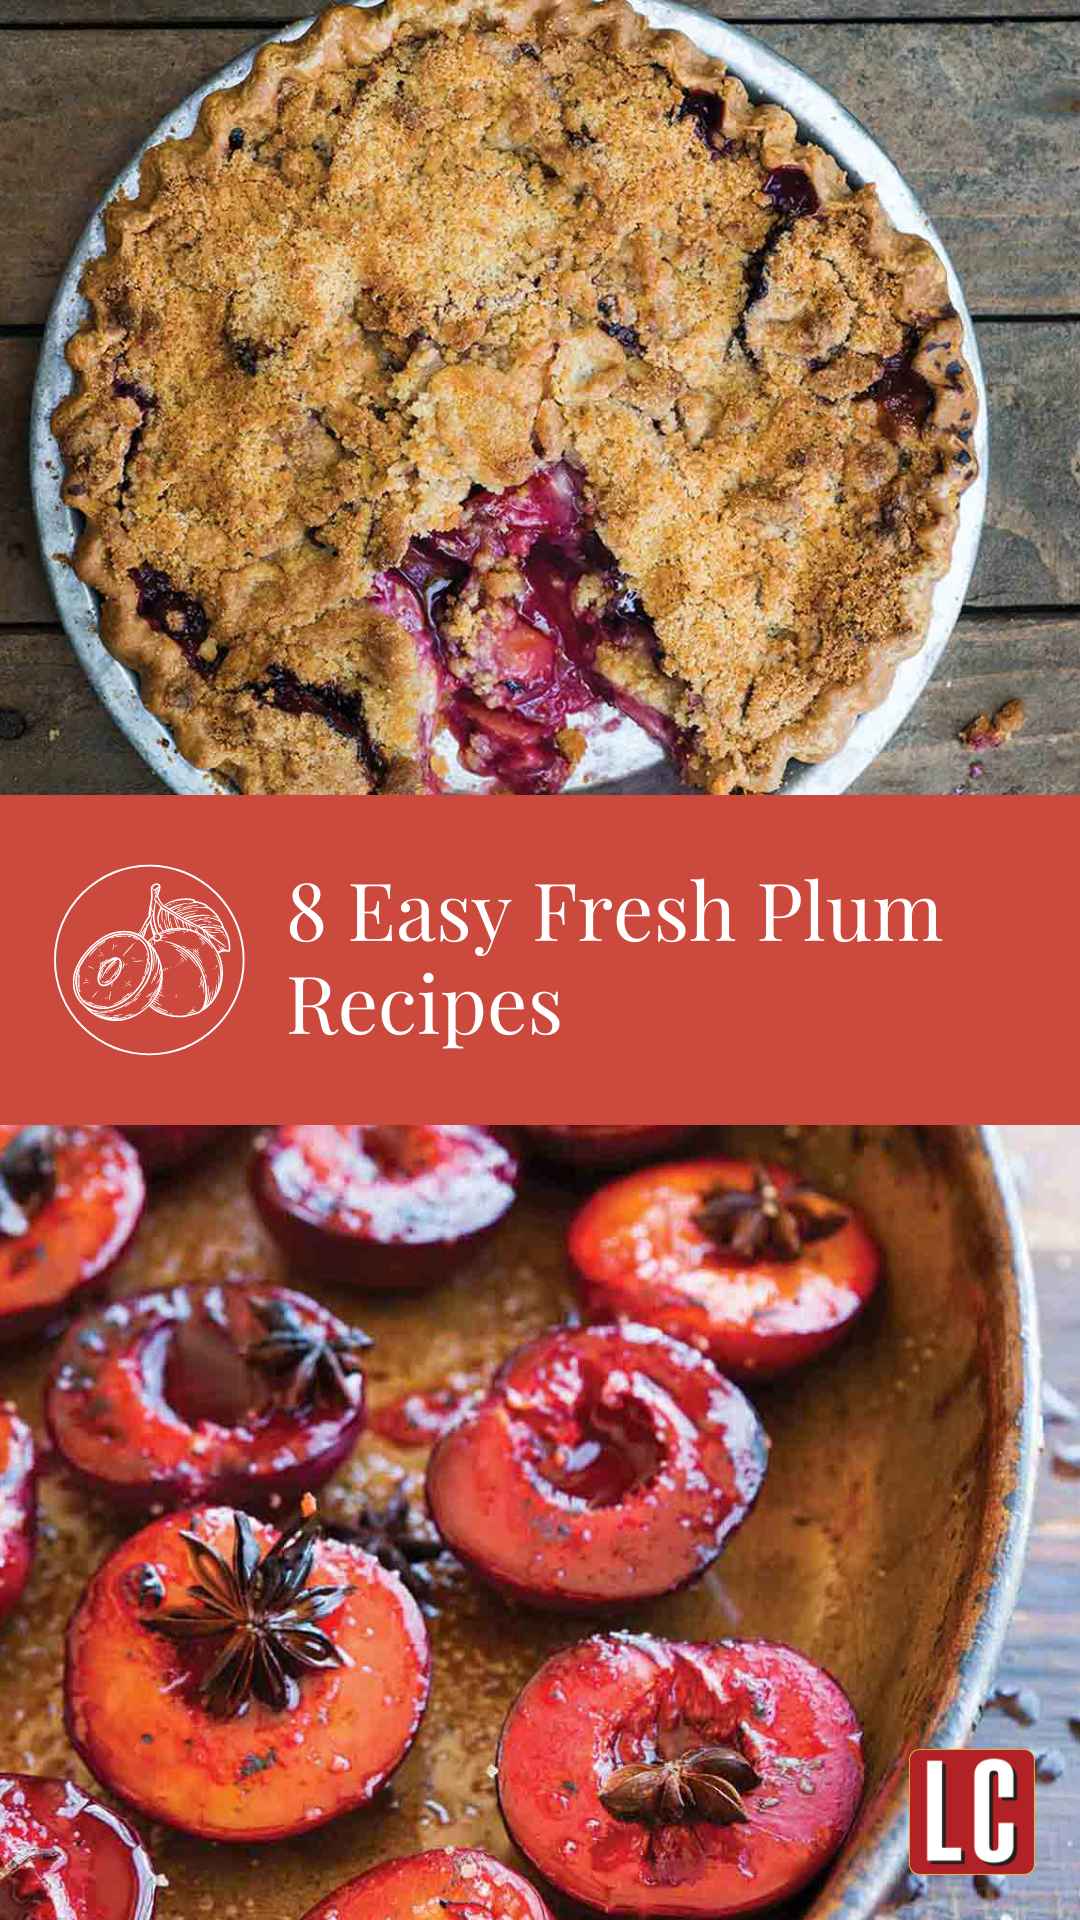 A plum crumble pie and a dish of roasted plums.